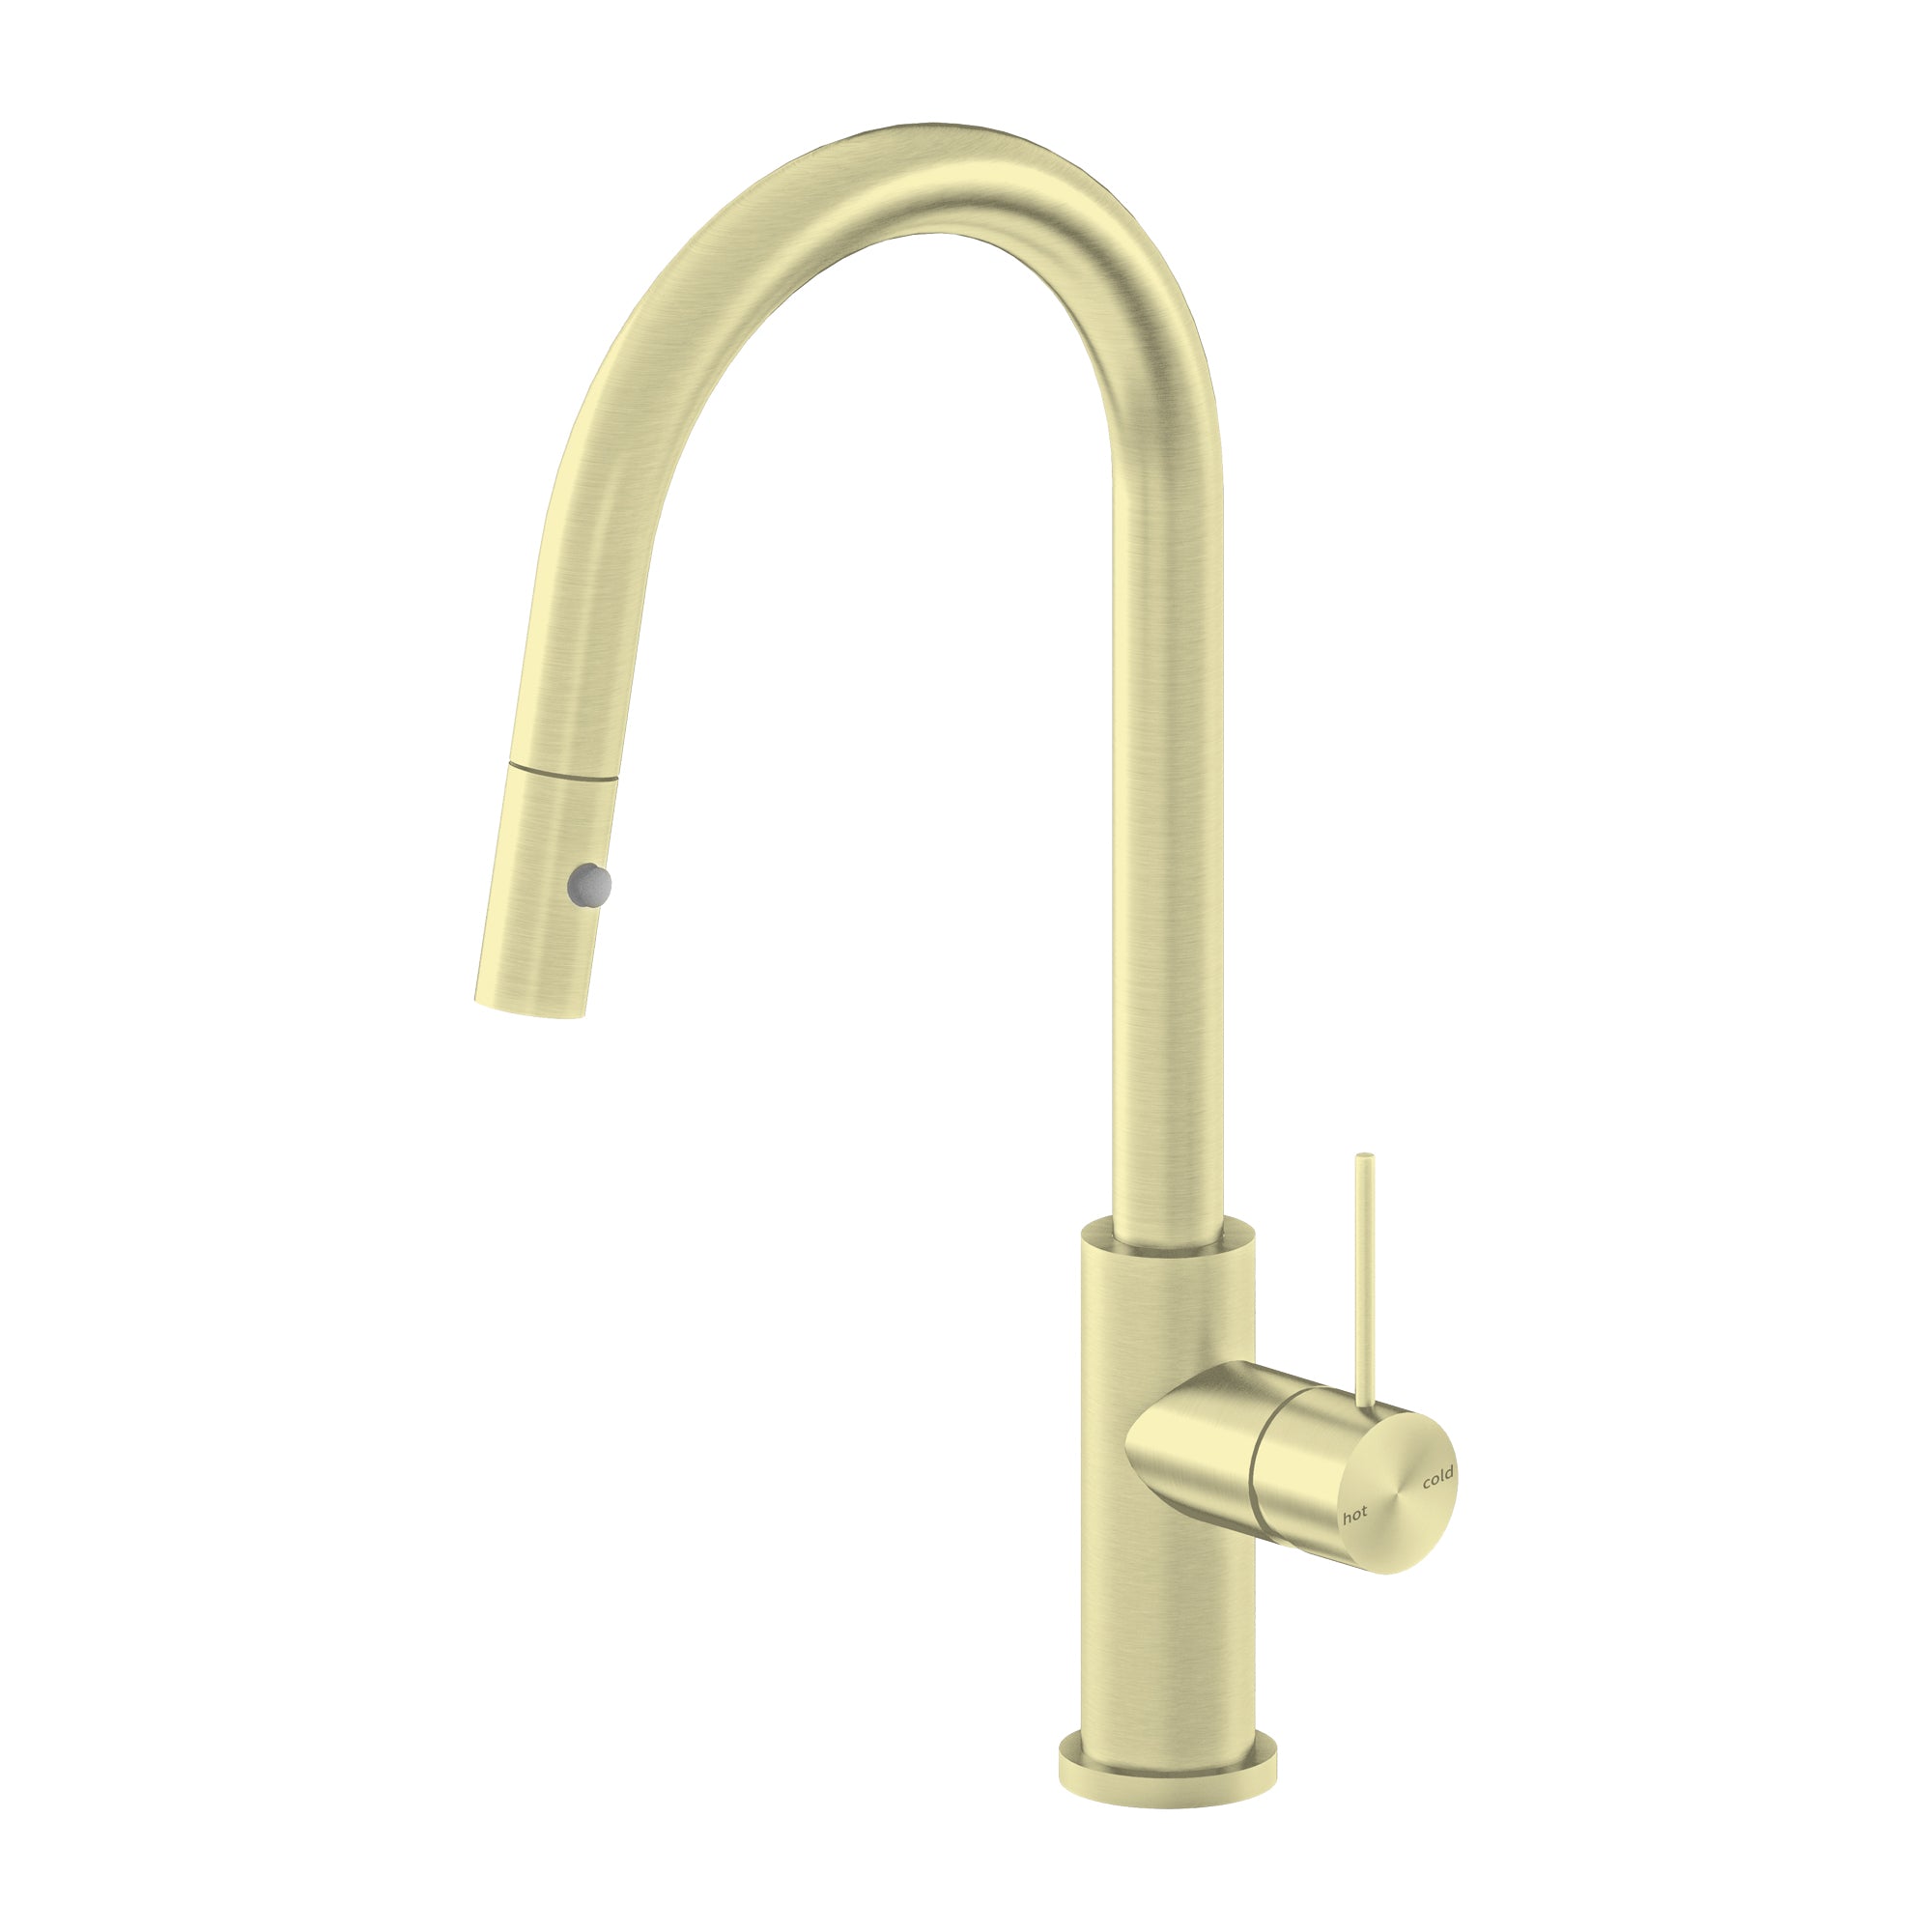 Mecca Pull Out Sink Mixer With Vegie Spray Function Brushed Gold - NR221908BG